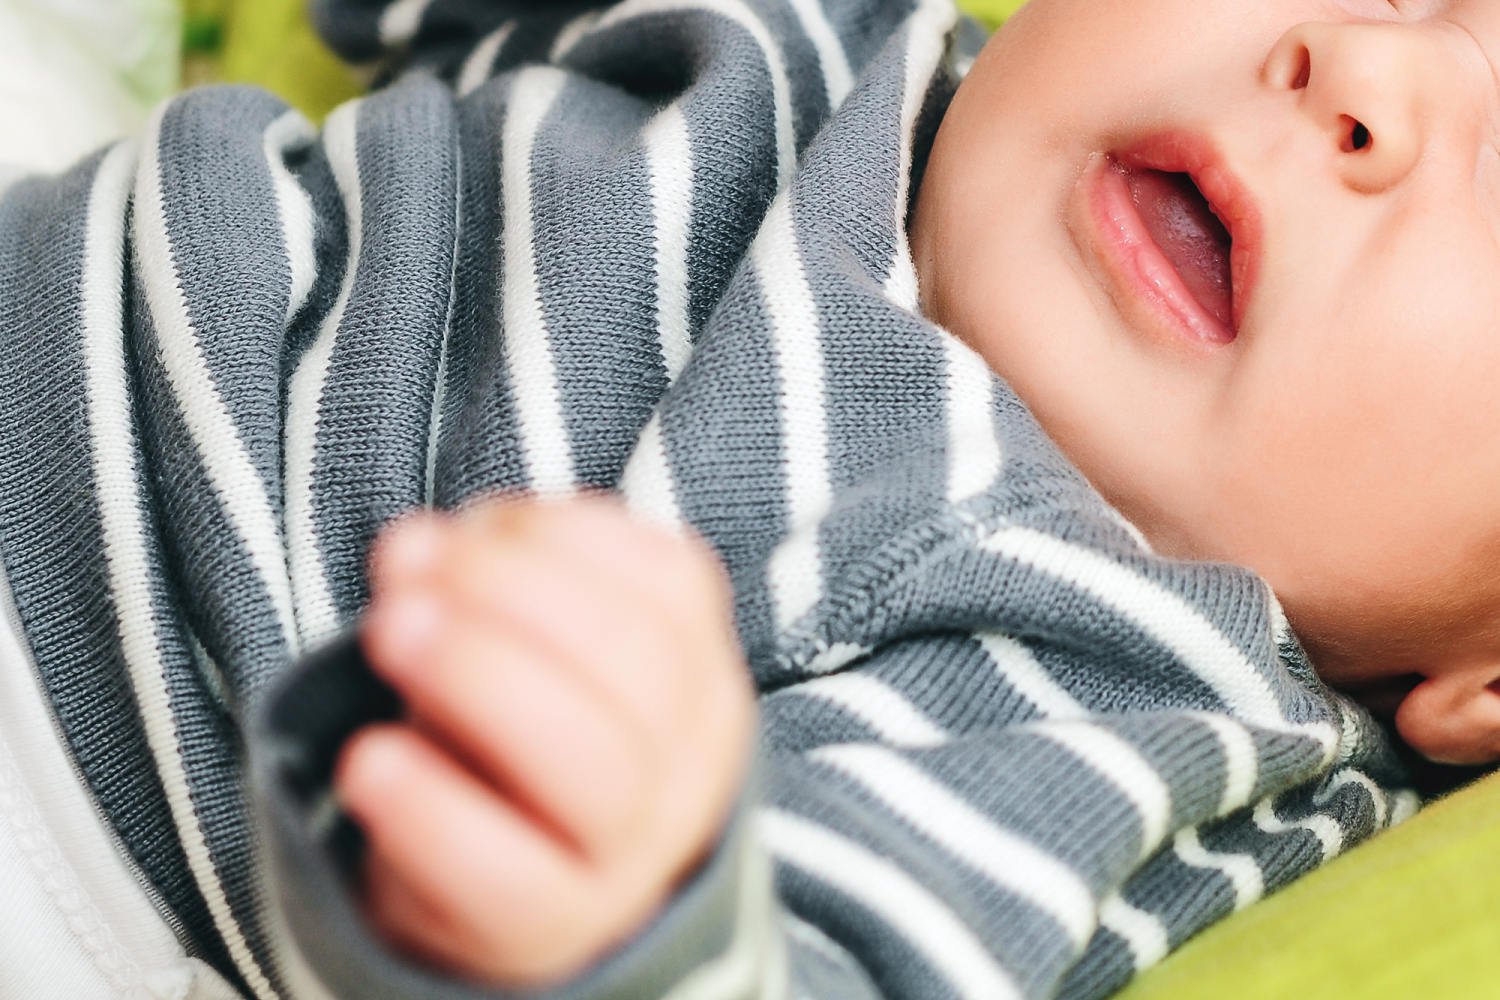 Whooping cough is rising sharply in some countries. Here's why you may need a booster.